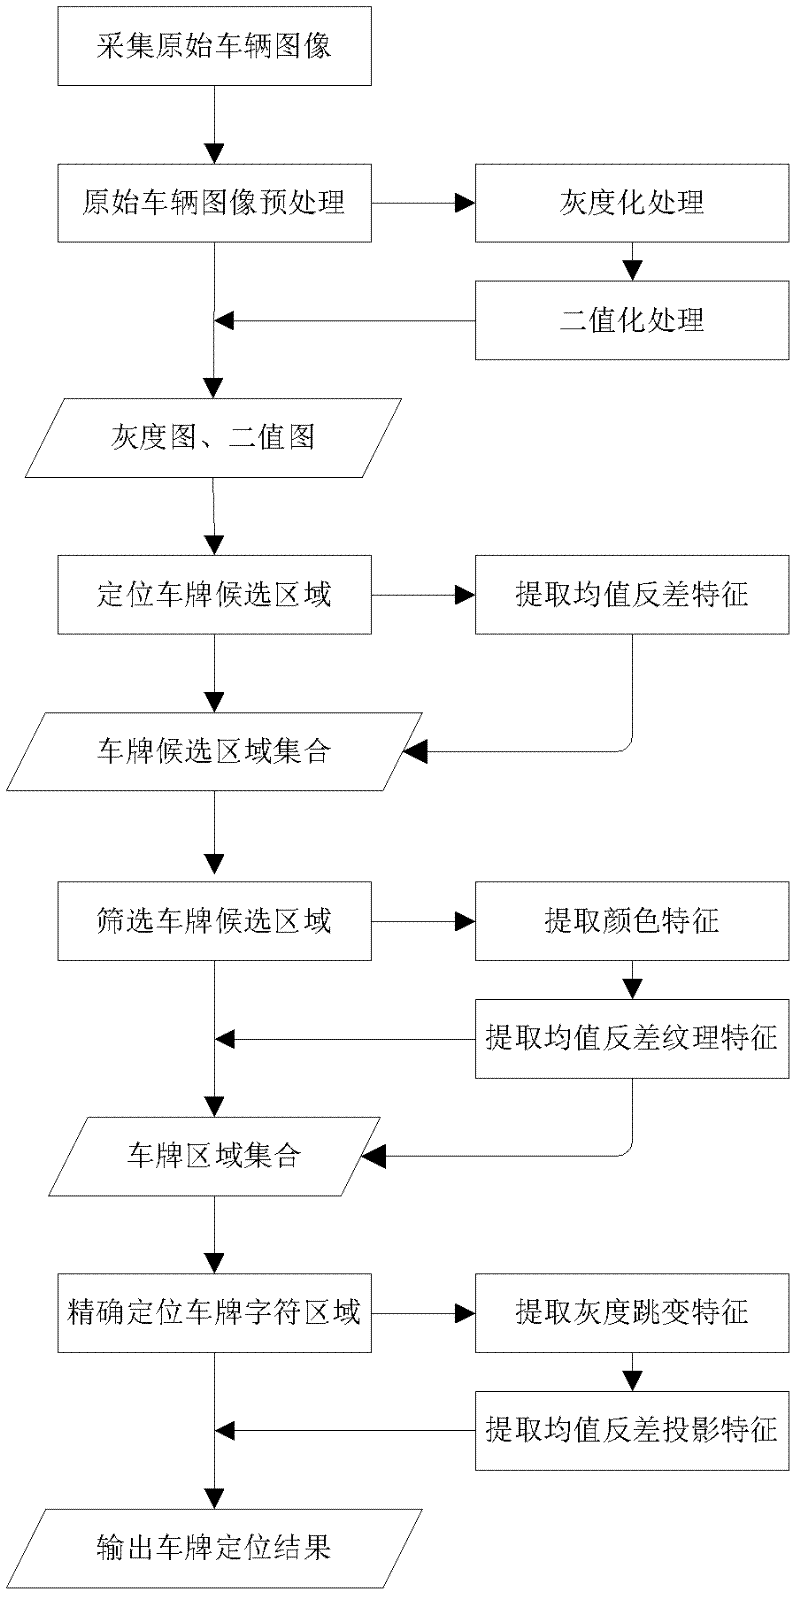 Multi-character characteristic fused license plate positioning method